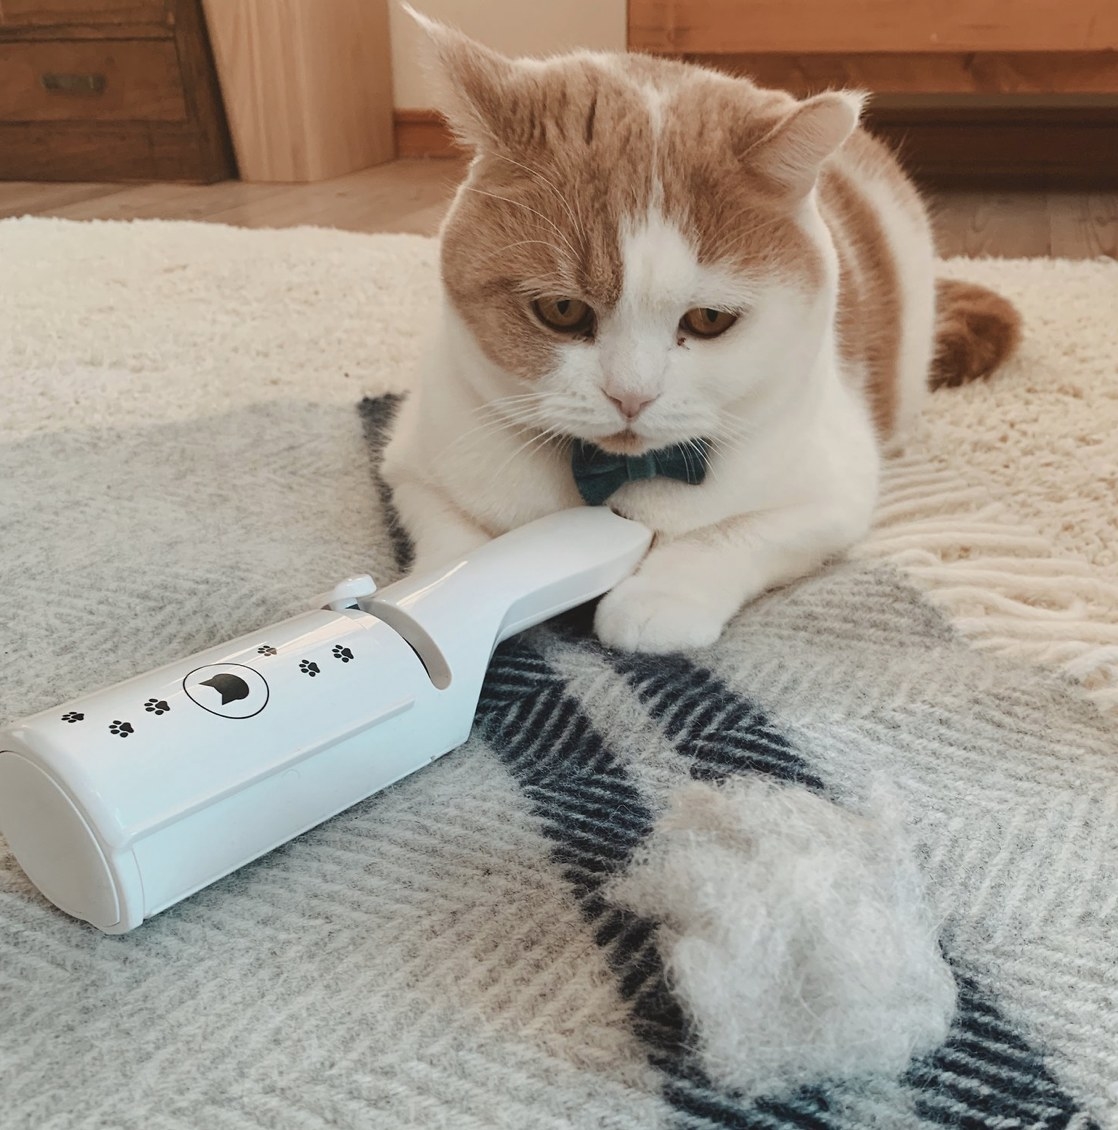 An orange and white cat with white cleaning tool